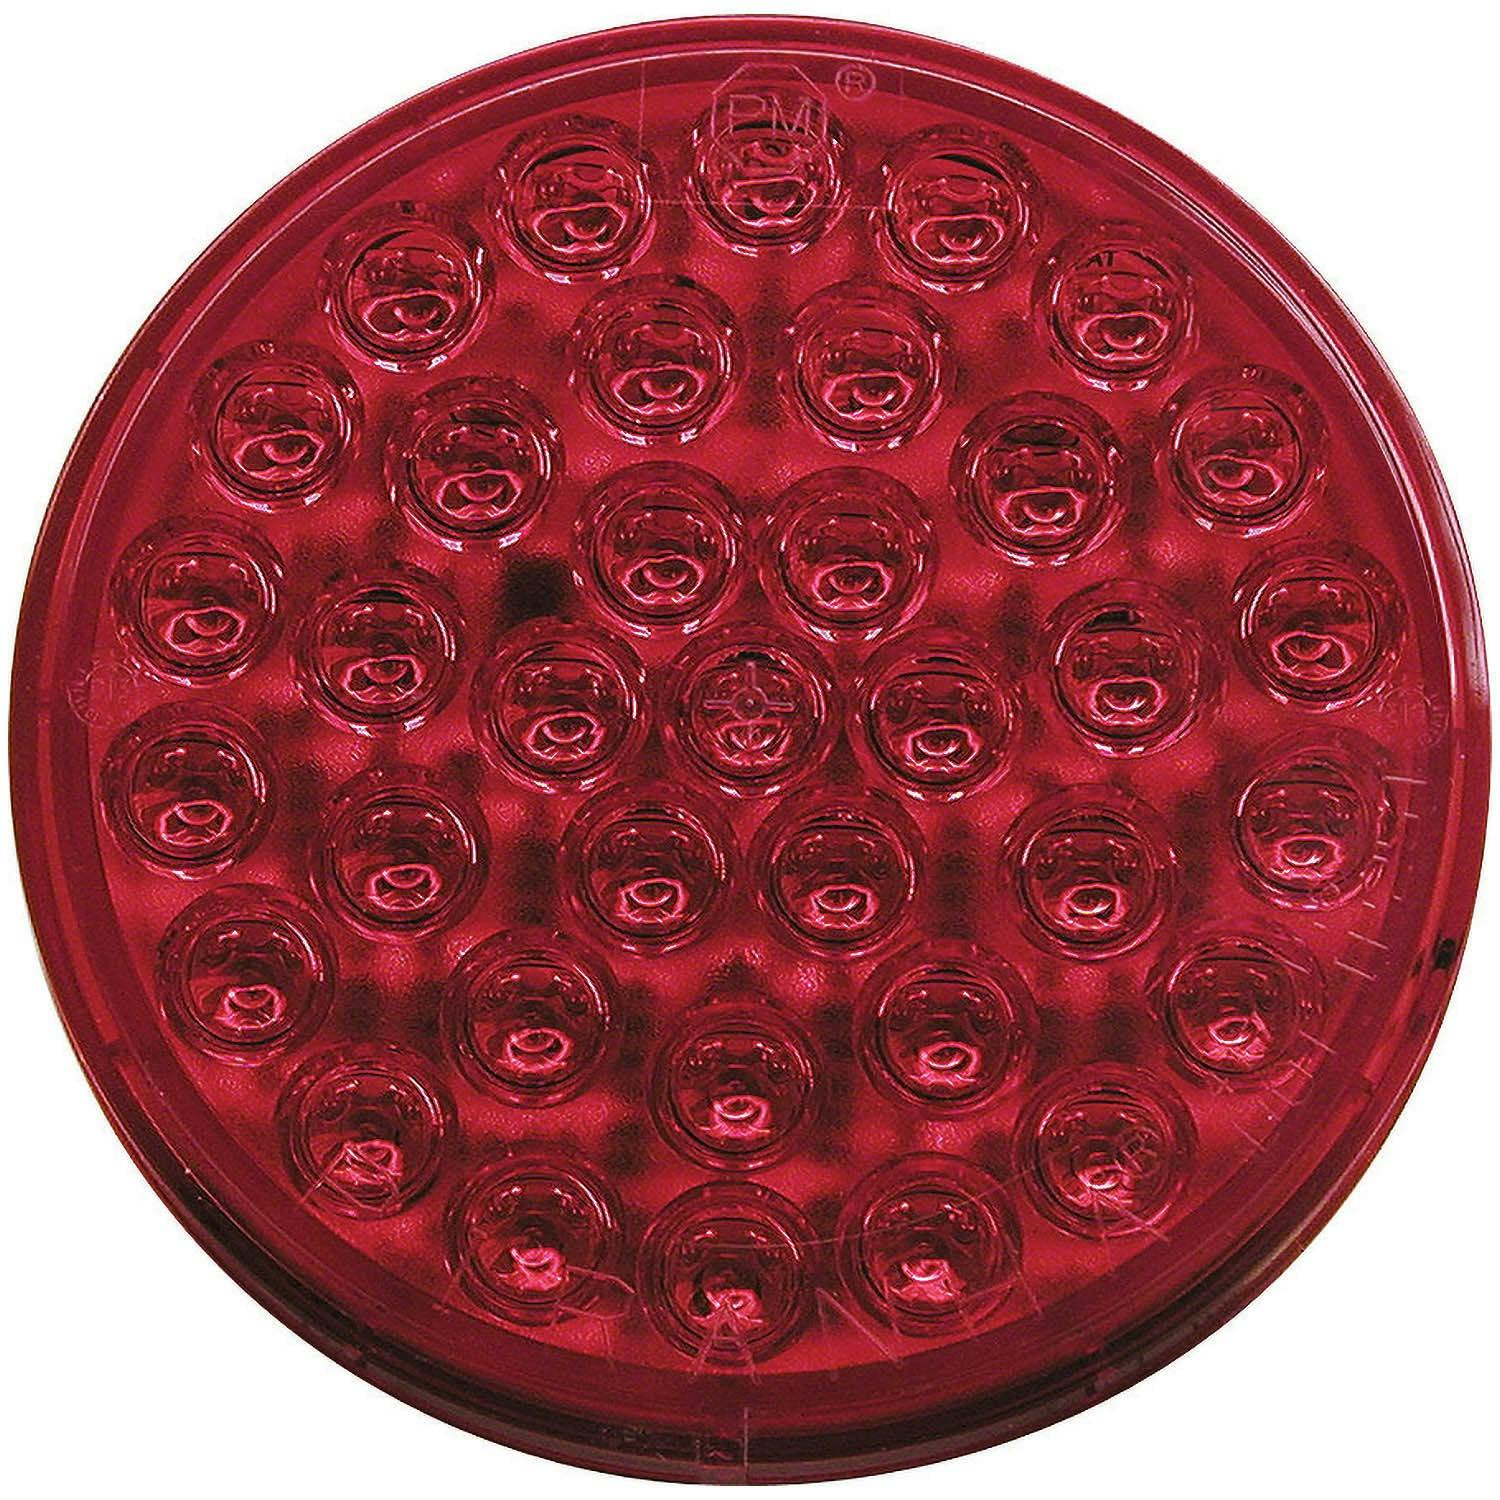 LED Stop/Turn/Tail, Round, 36-Diodes, Red Kit, 4", red (Pack of 6)